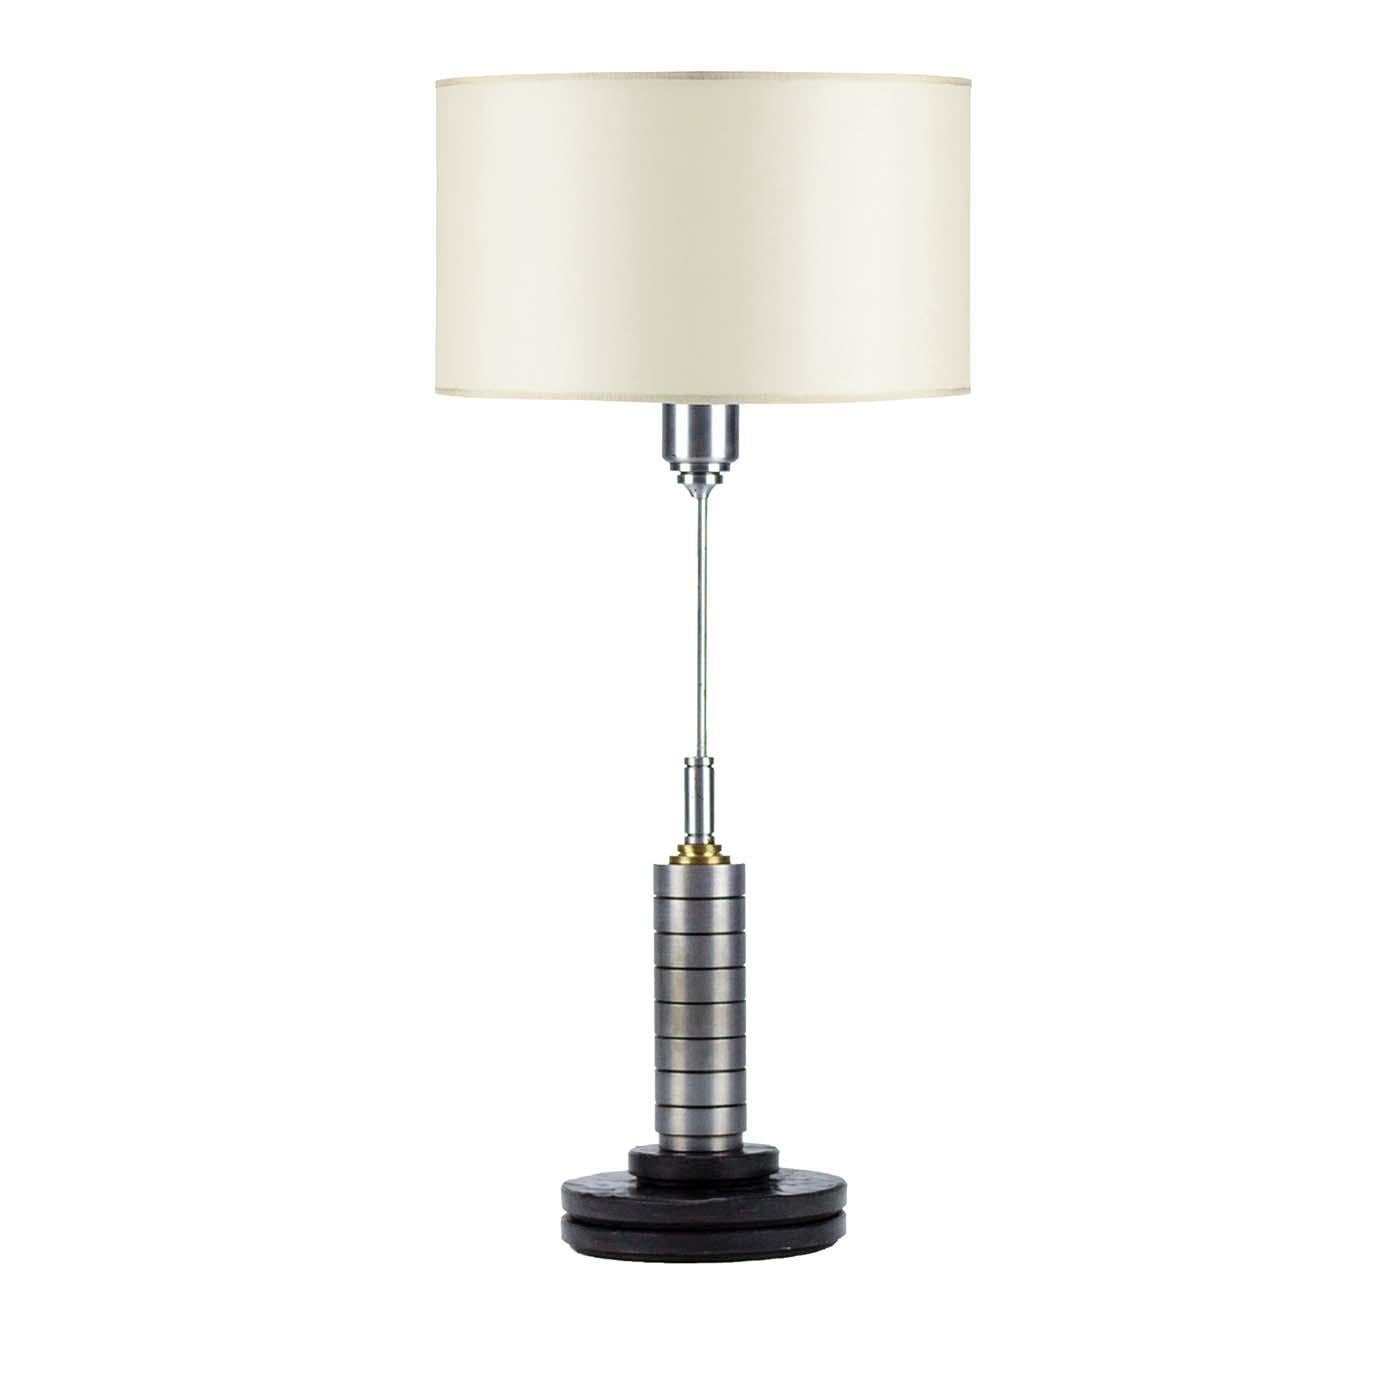 Masterful craftsmanship and luxurious material merge in this superb abat-jour whose metallic finish and white silk drum shade lend a glamorous touch to the modern silhouette. Raised on a round base of matrix marble topped by a cylindrical element,